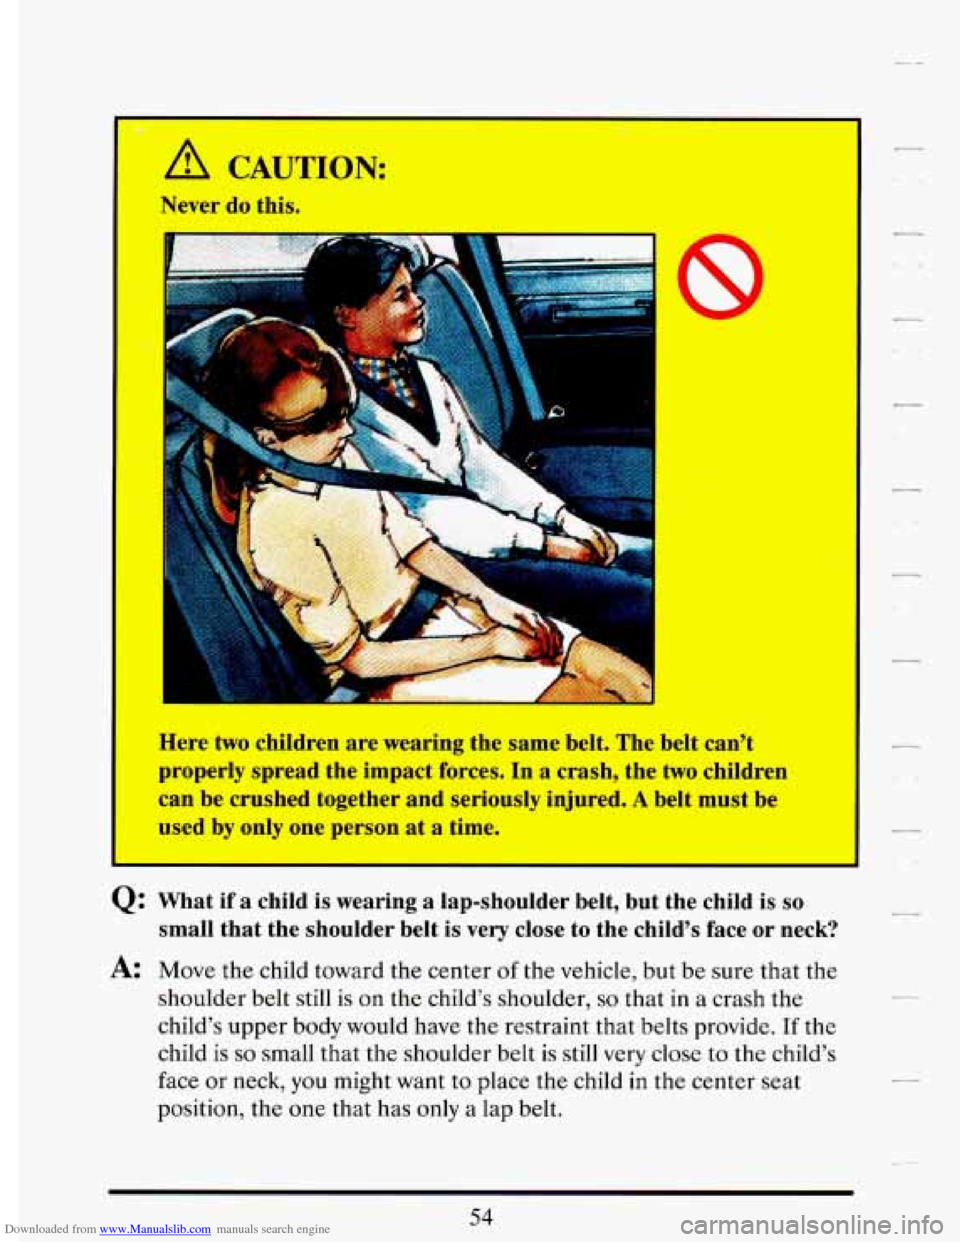 CADILLAC DEVILLE 1993 7.G Owners Manual Downloaded from www.Manualslib.com manuals search engine I 
A 
Nev - 
-I 
CALJ I ION: 
do this. 
P l- 
Here two children are wearing  the same  belt. The  belt  can’t 
properly  spread  the  impact 